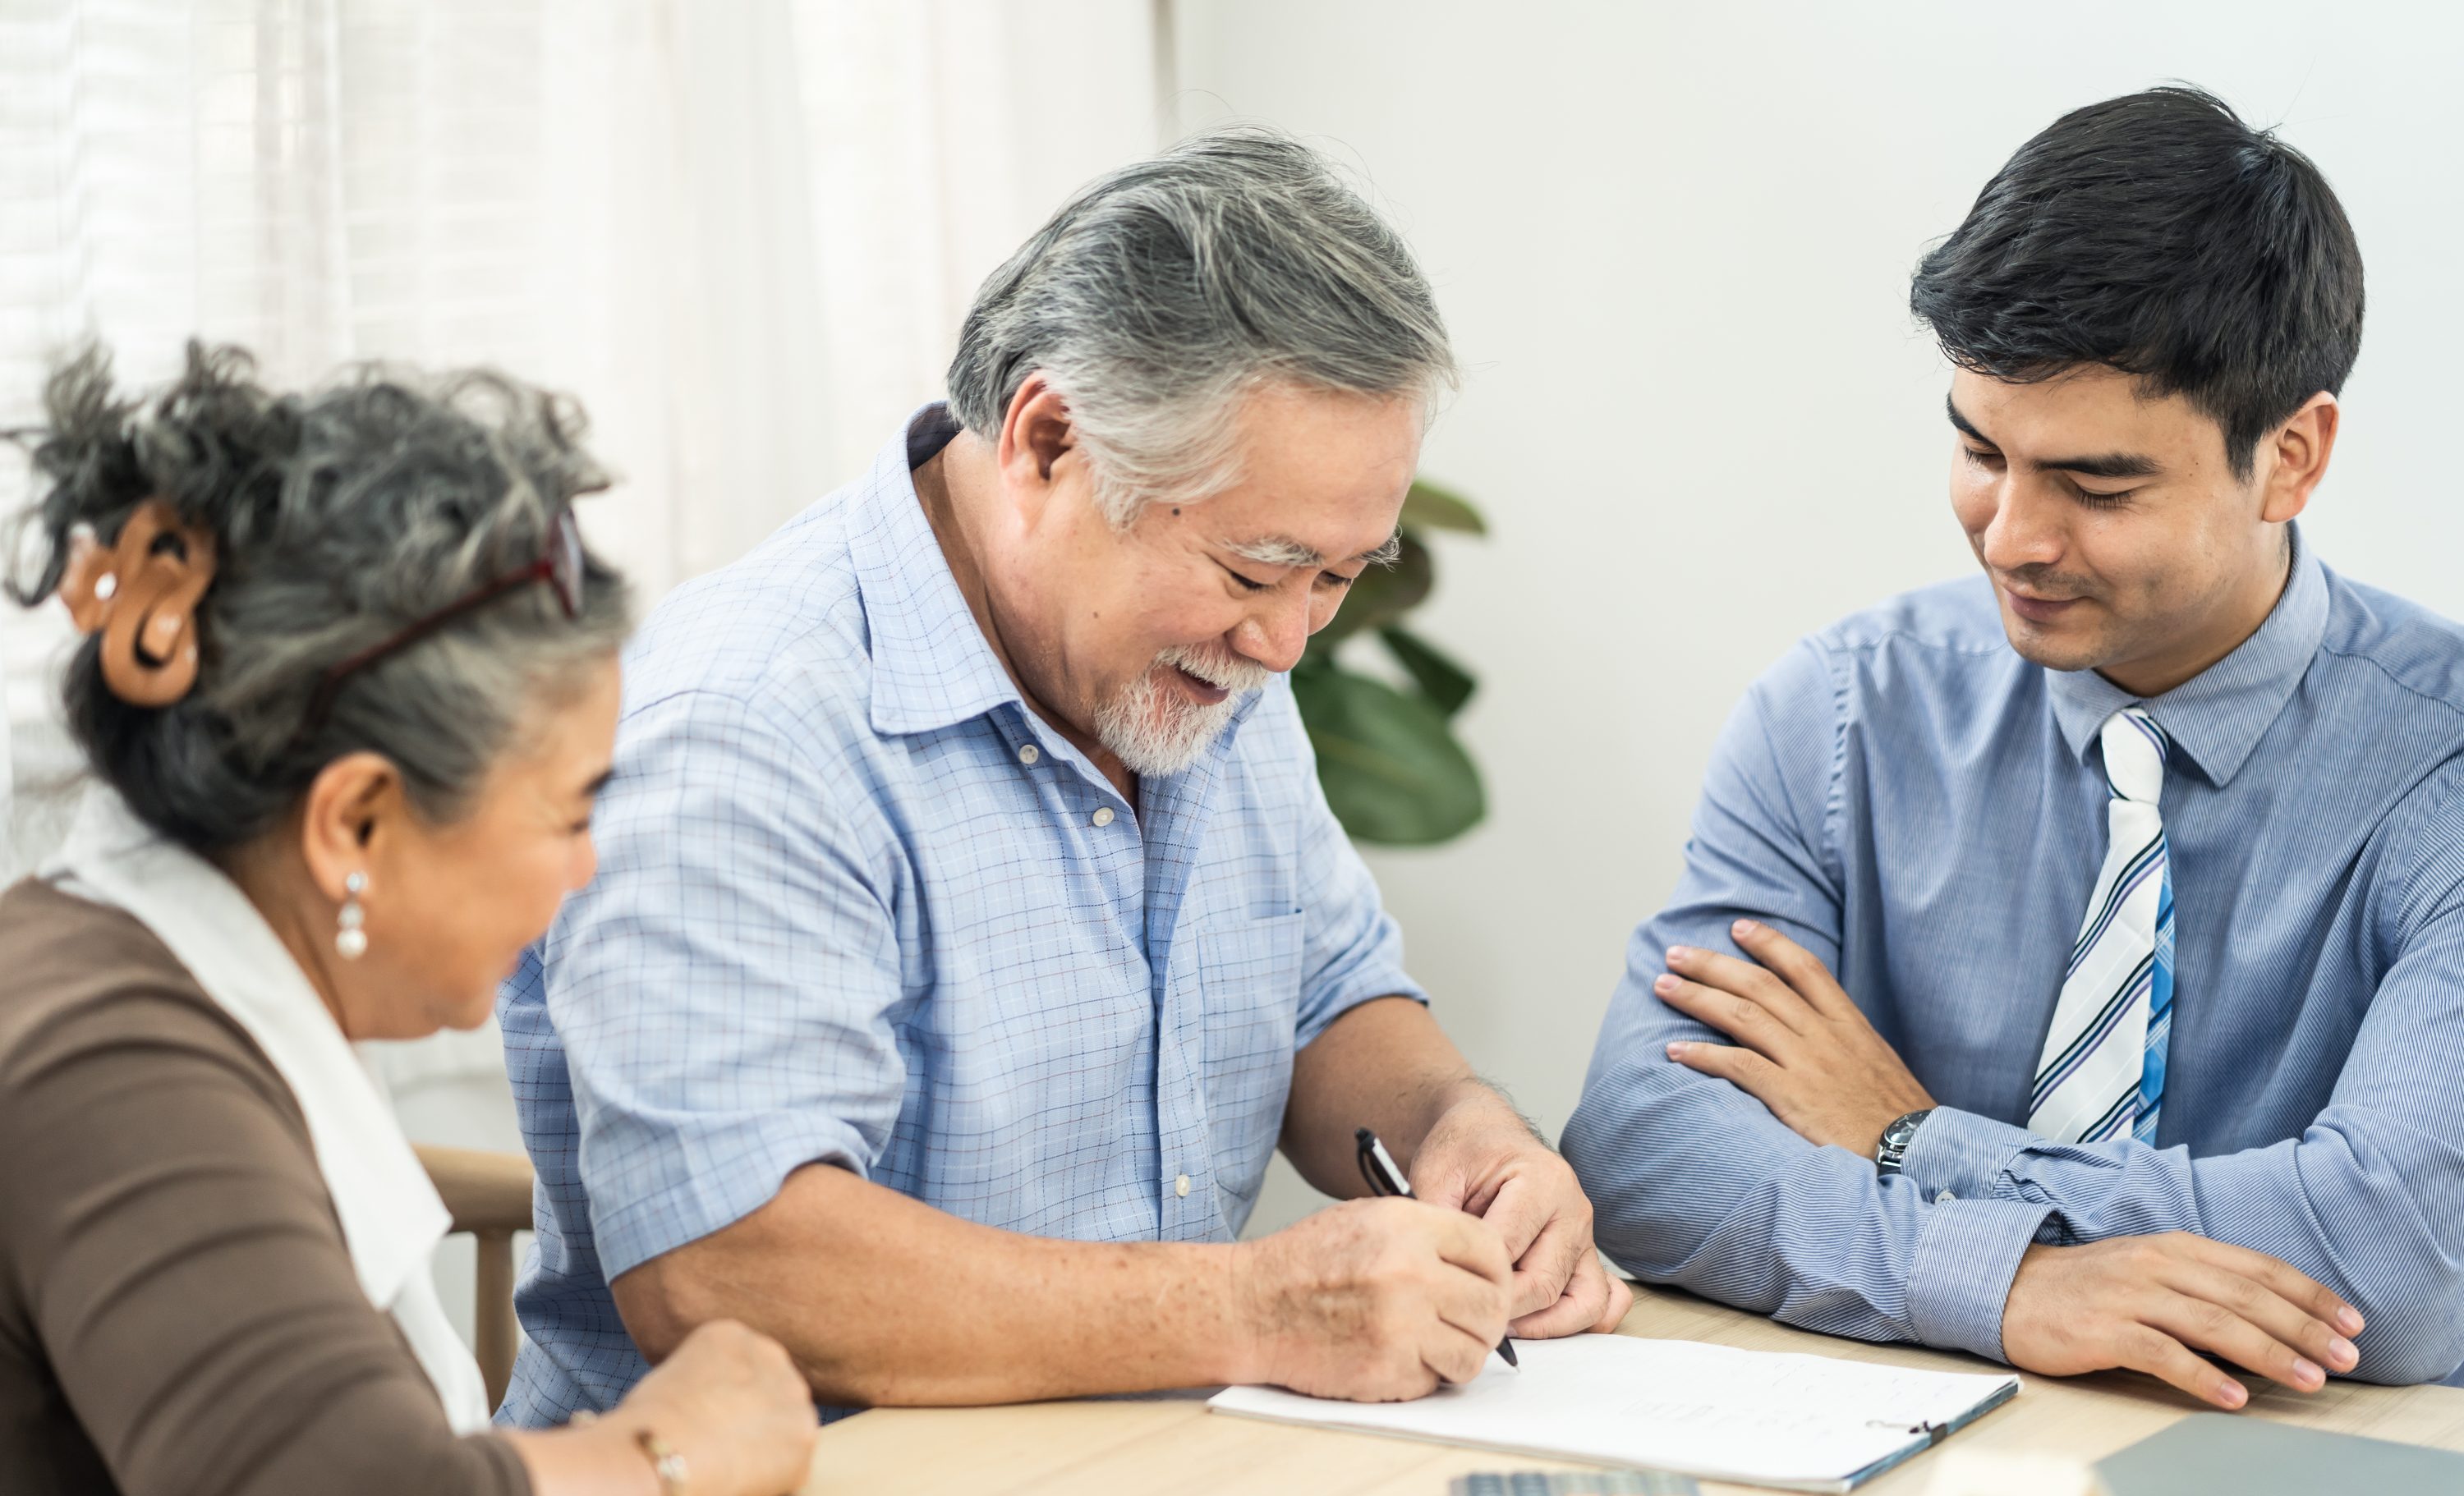 What estate planning strategies are available for non-U.S. citizens?